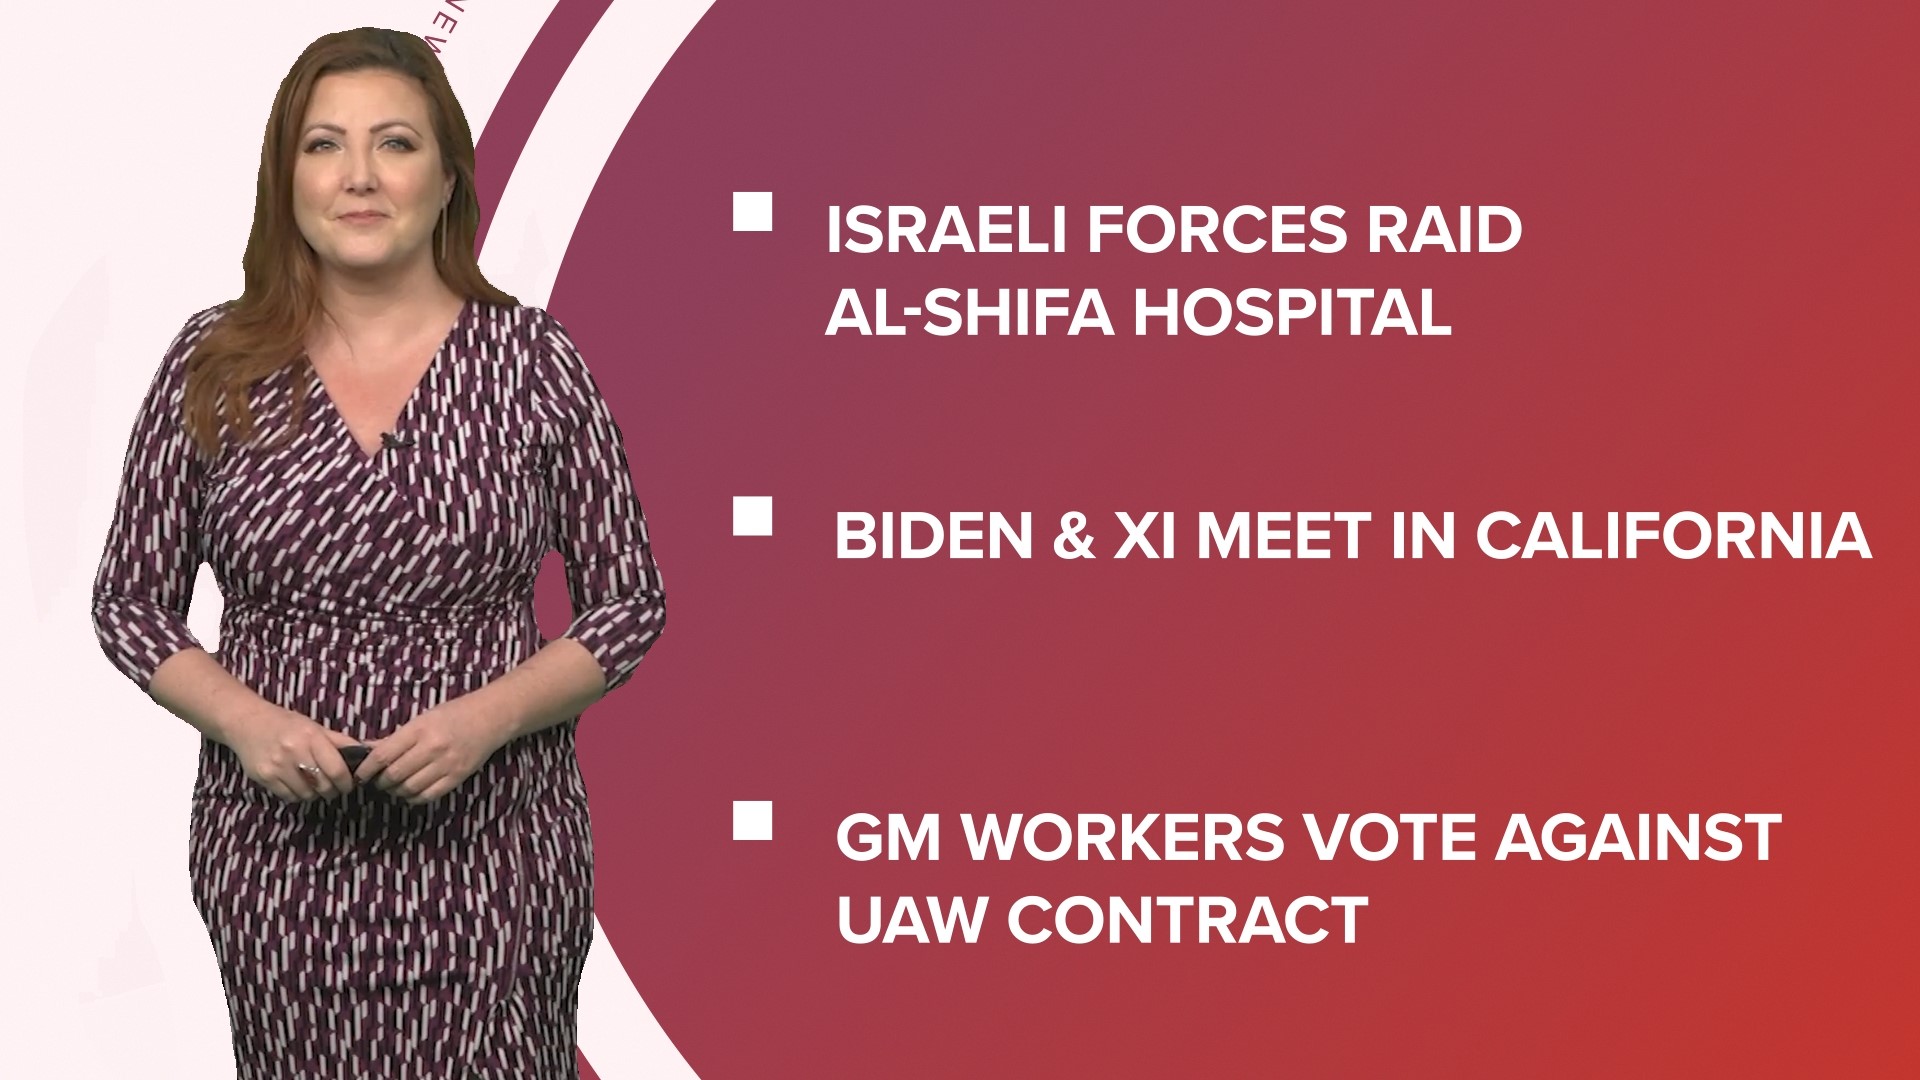 A look at what is happening in the news from President Biden meeting with Chinese President Xi Jinping to workers voting against GM-UAW deal.